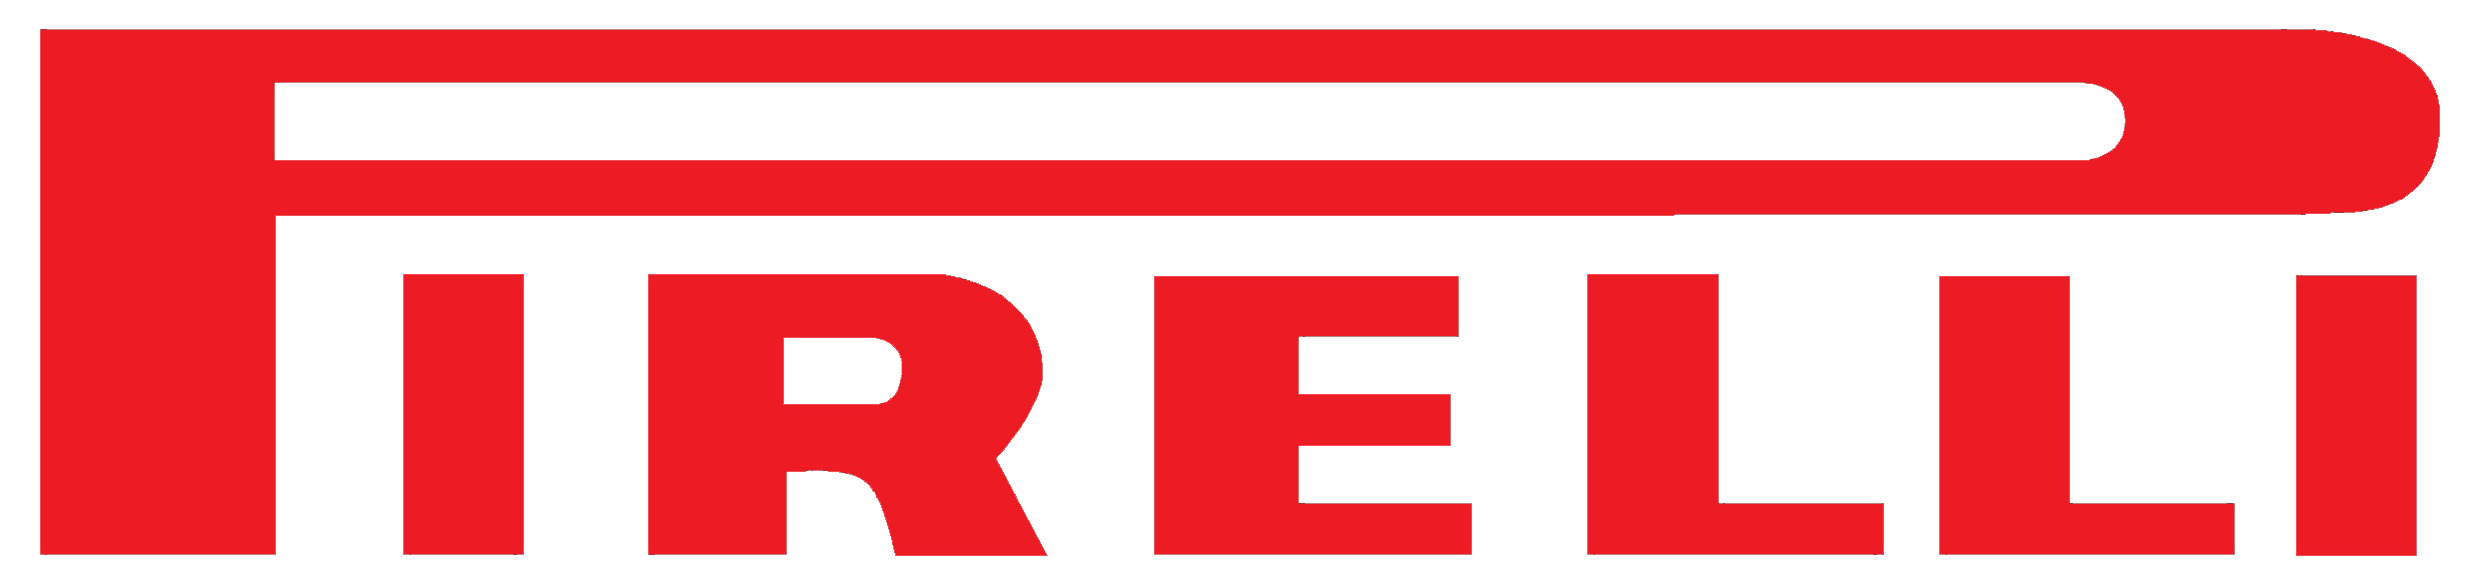 Pirelli Red Logo png icons